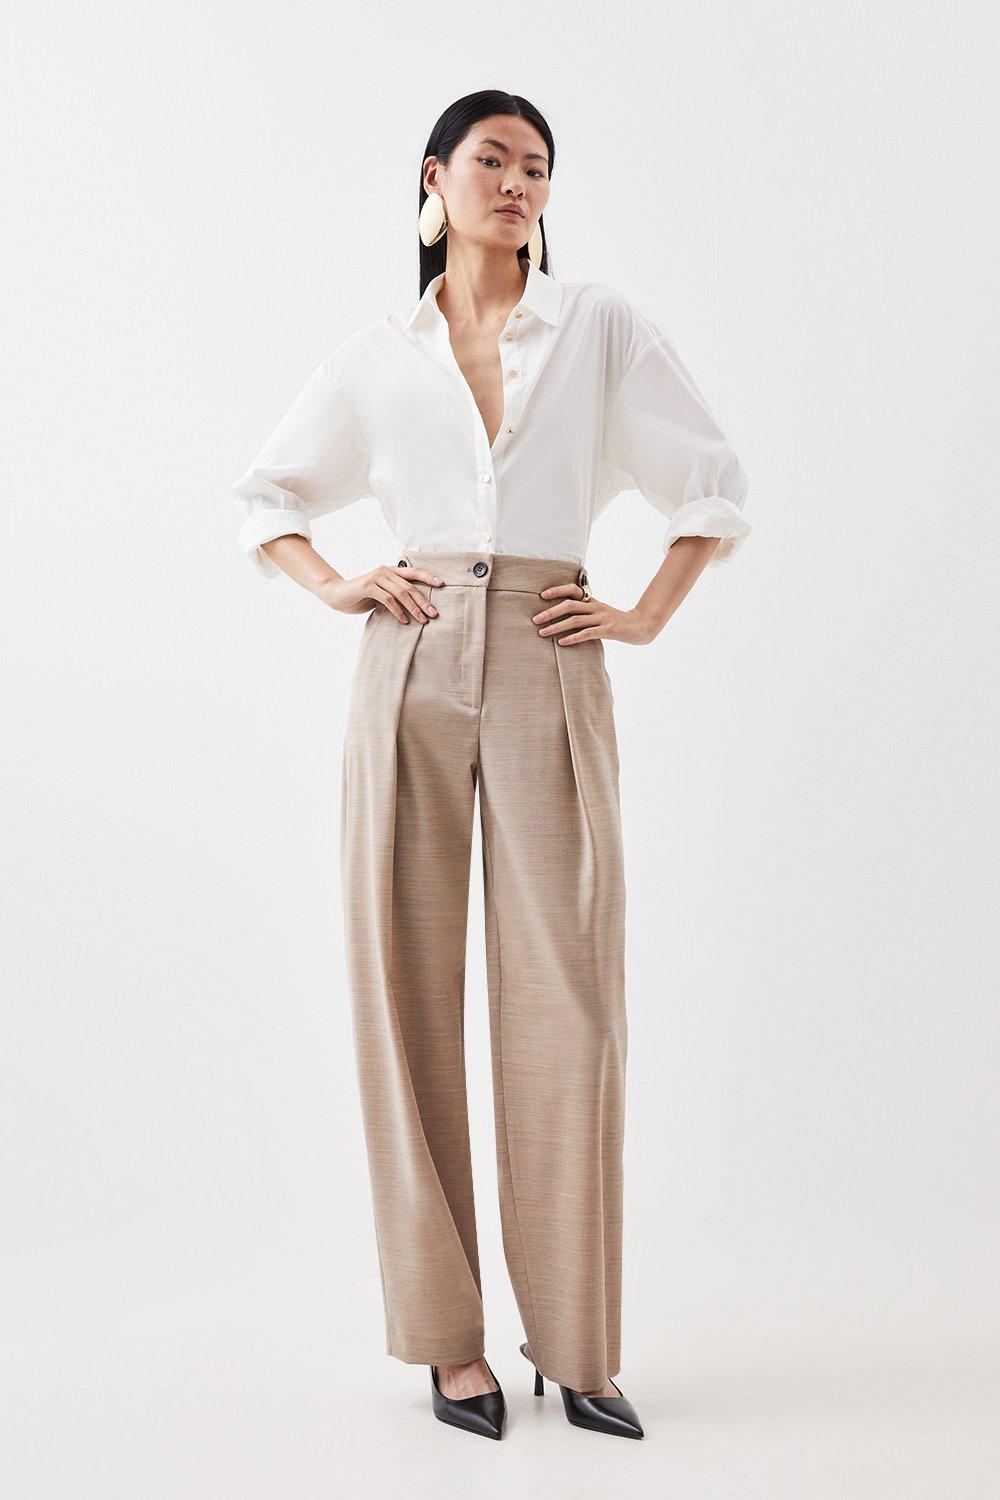 Workwear Hall of Fame: Stretch Crepe Pants 